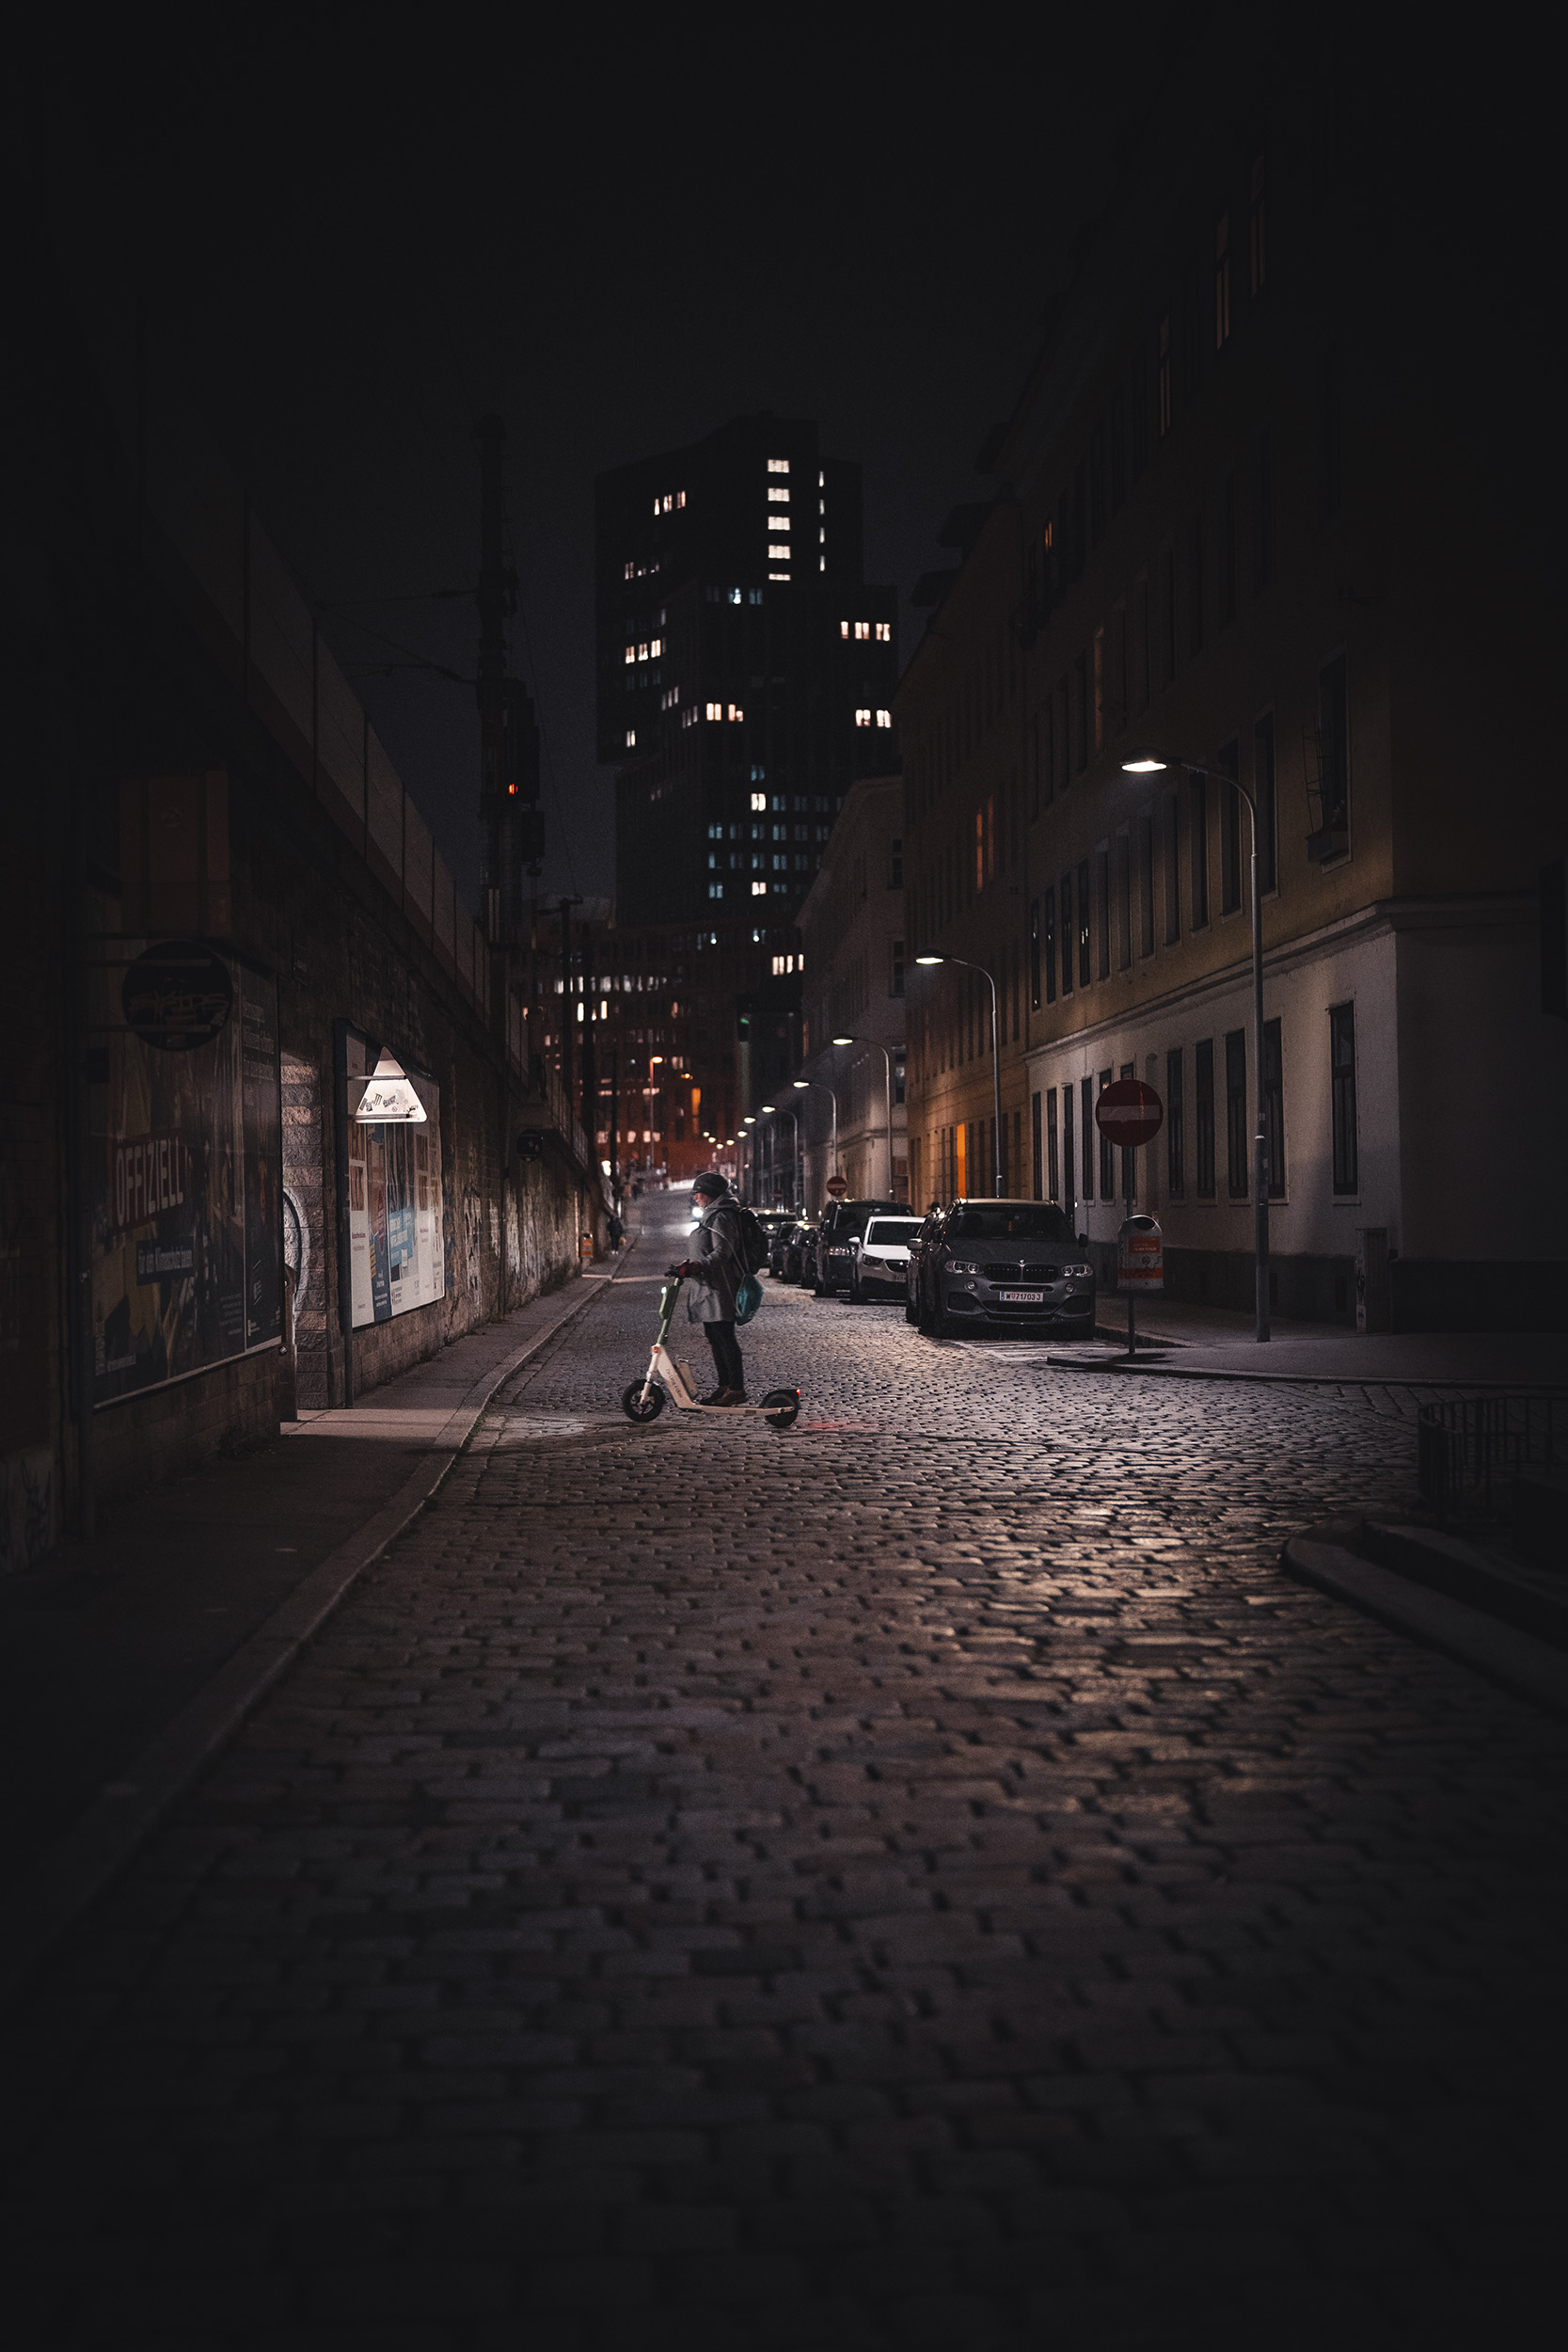 person-on-a-scooter-at-night-in-vienna.jpg